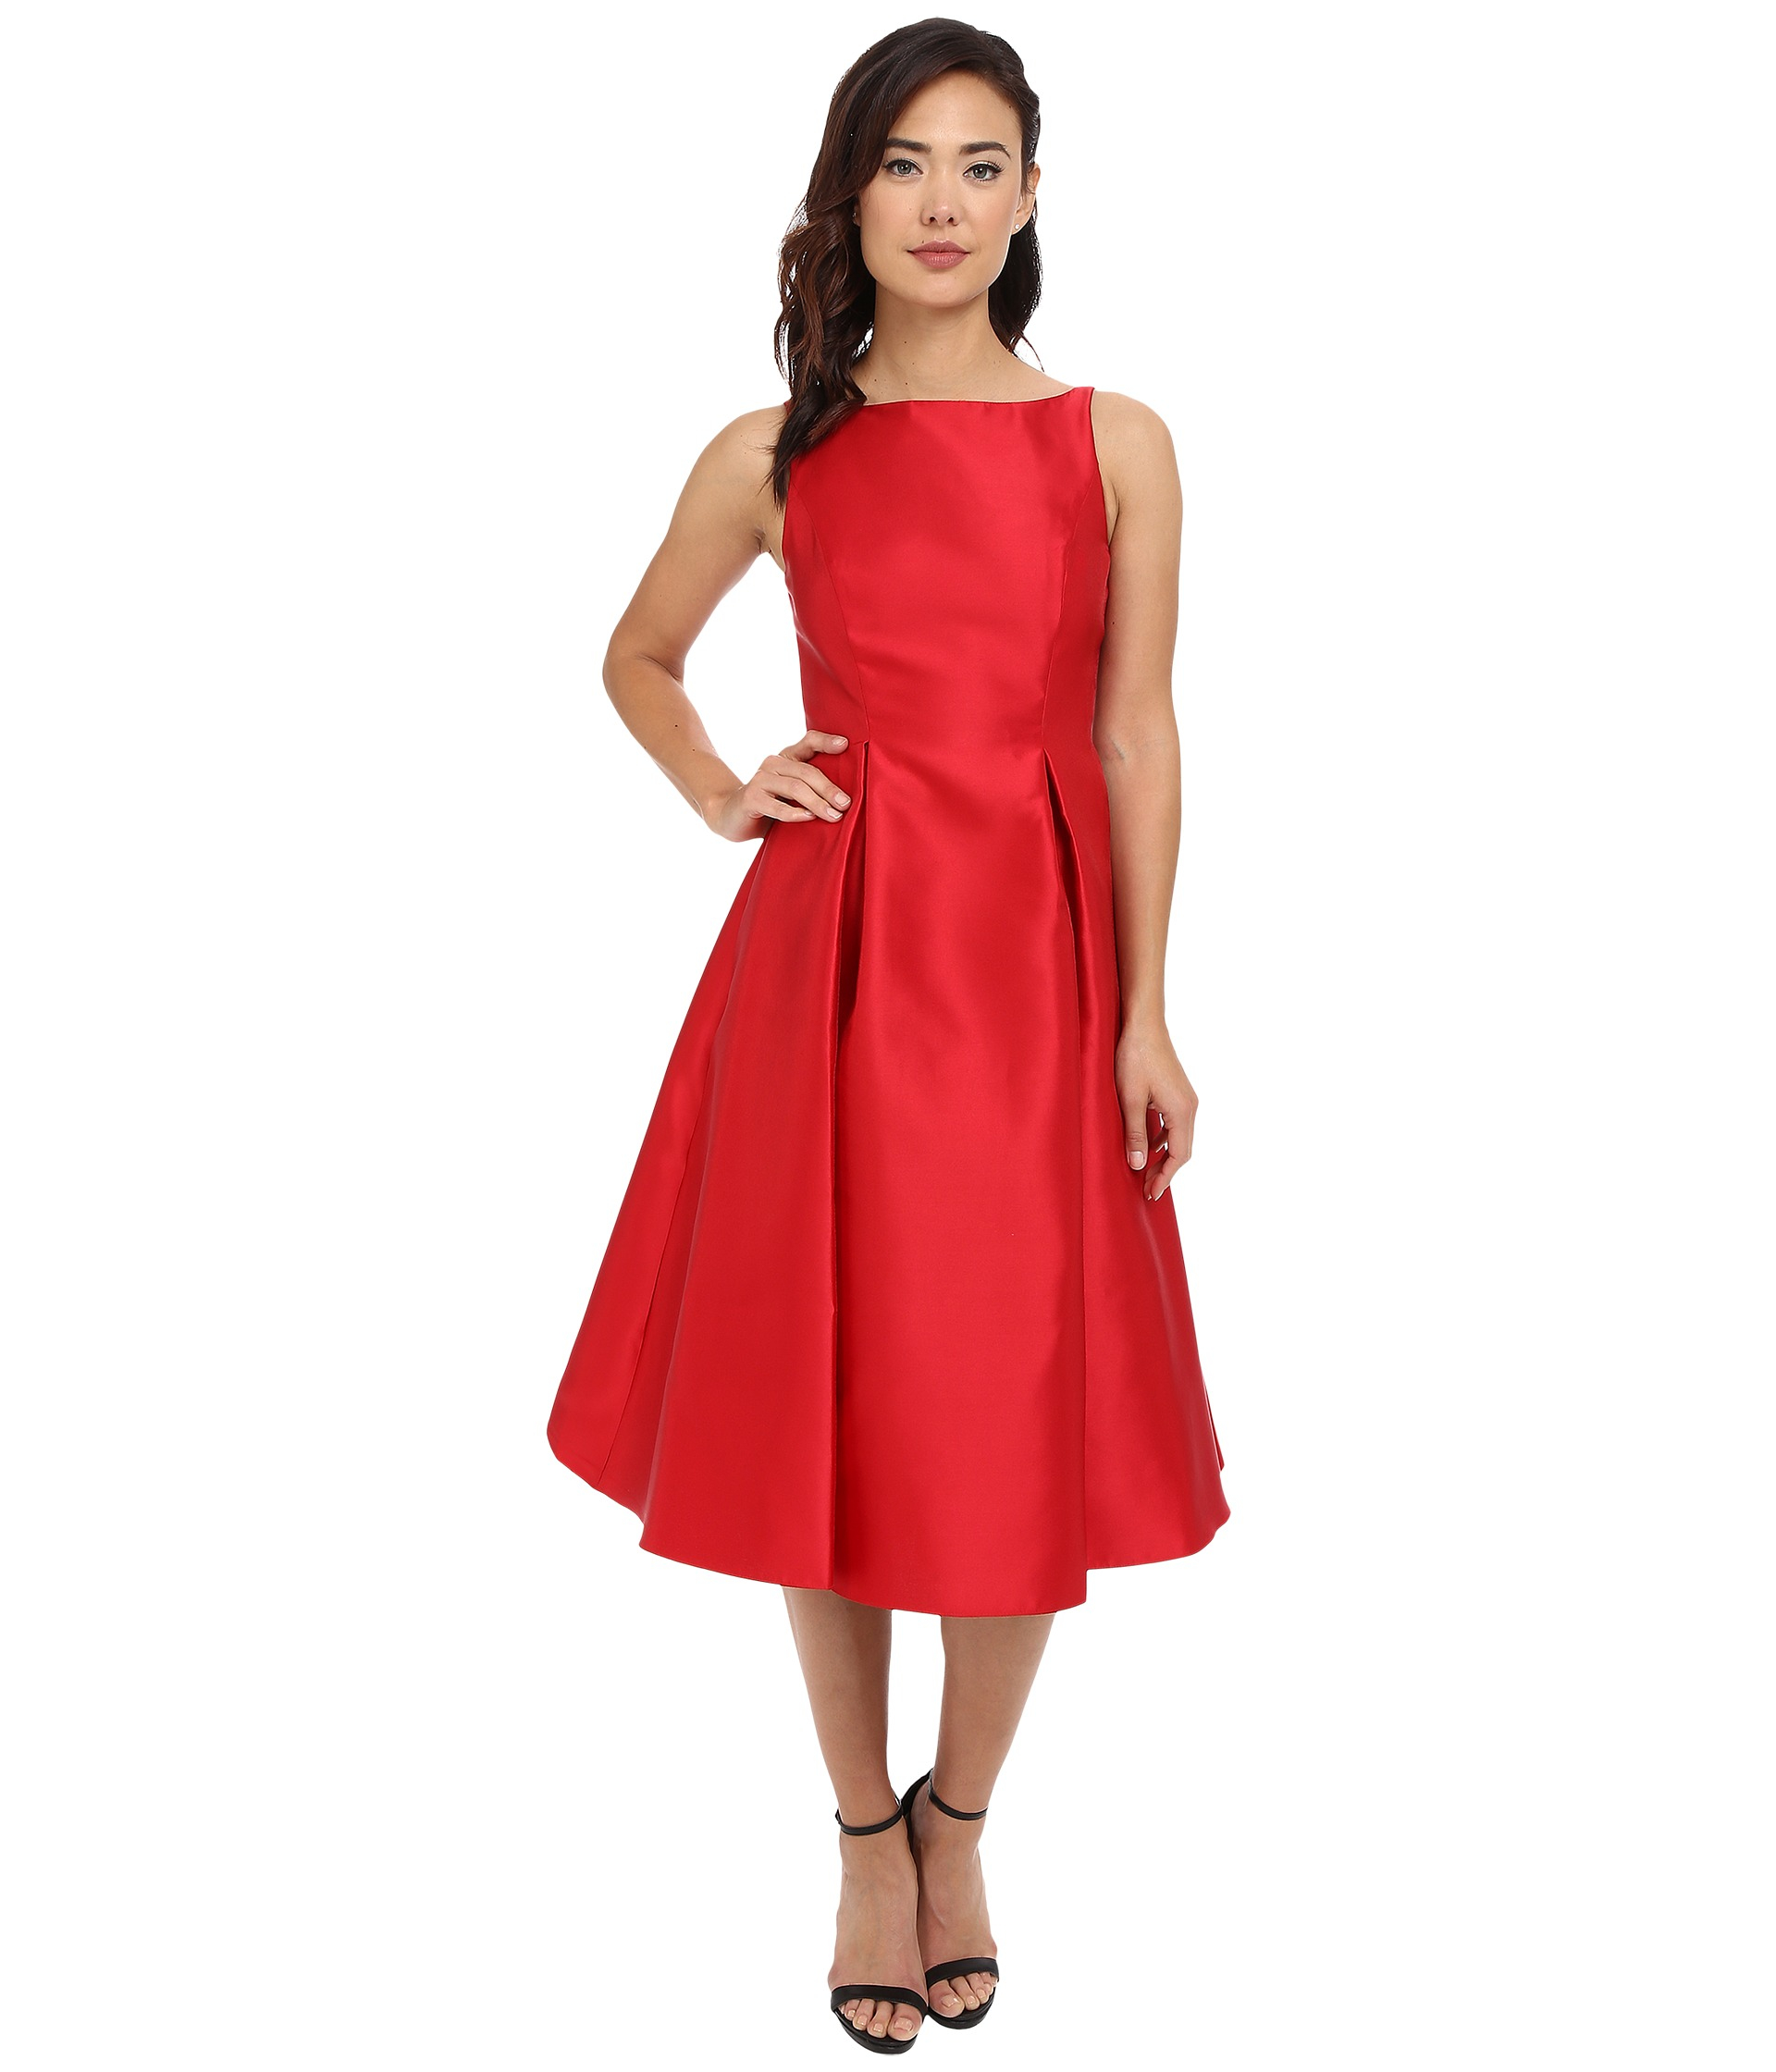 Adrianna Papell Sleeveless Tea Length Dress in Red - Lyst